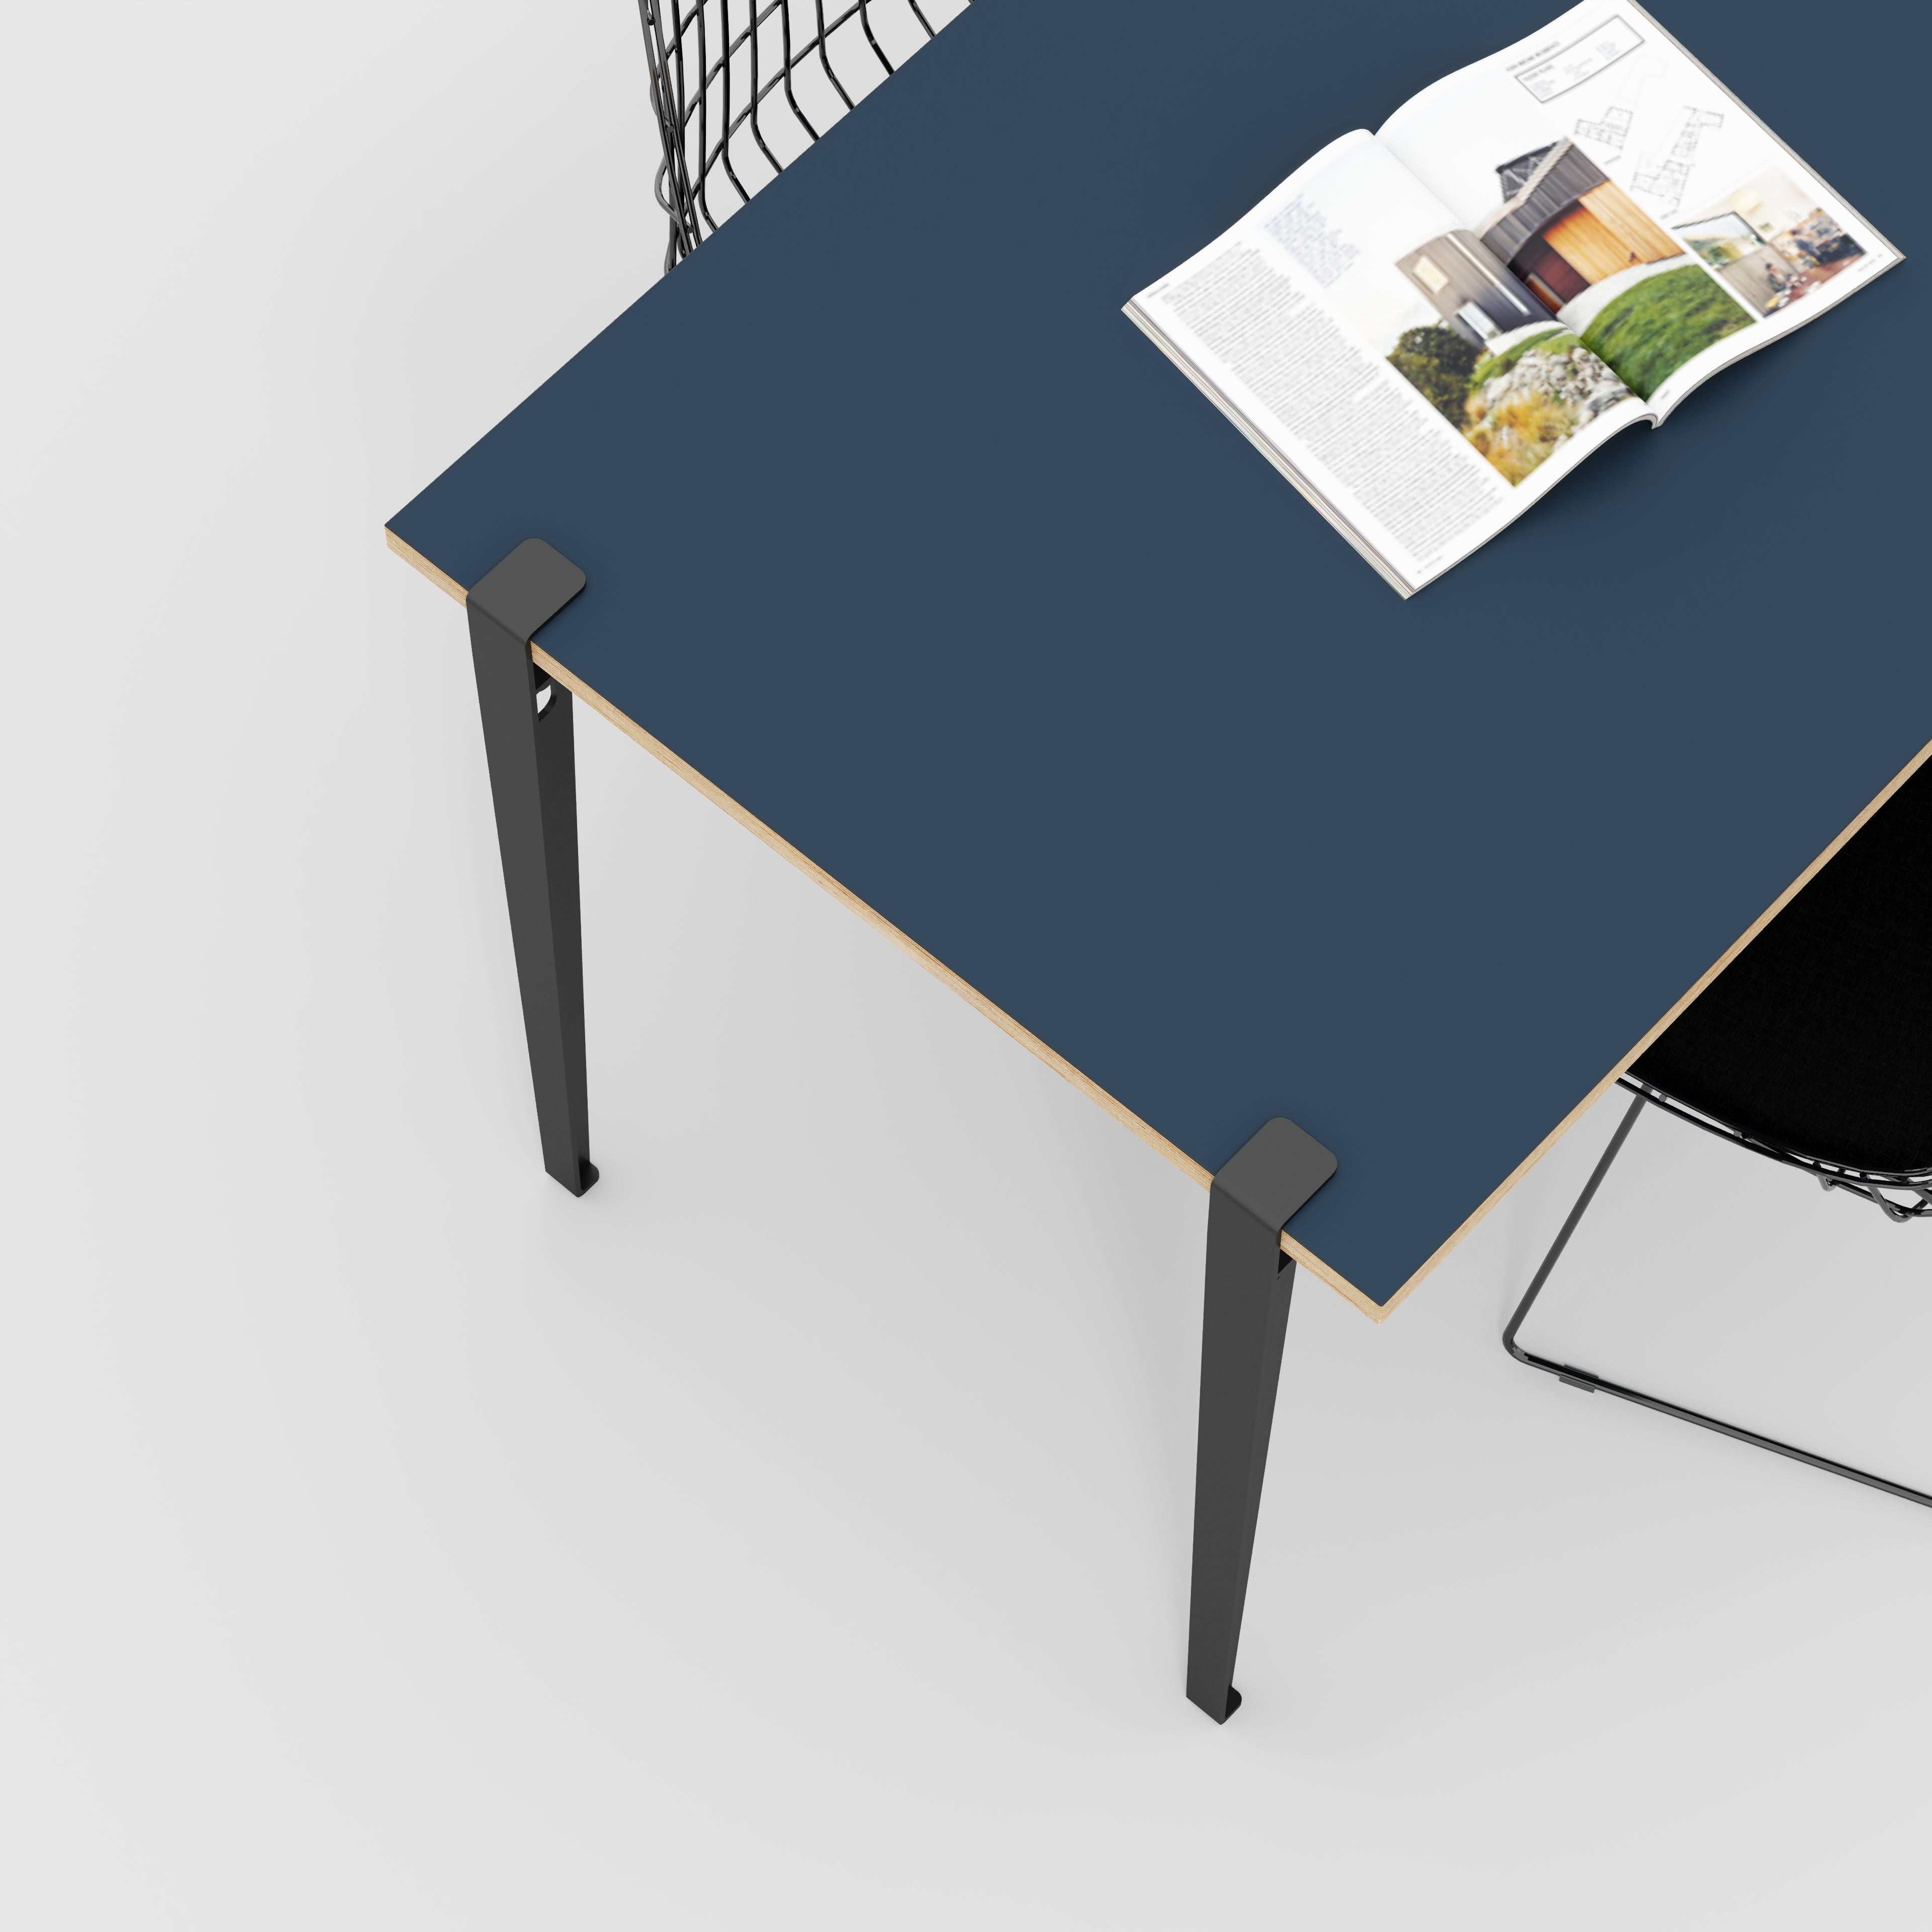 Wall Table with Black Tiptoe Legs and Brackets - Formica Night Sea Blue - 1200(w) x 800(d) x 750(h)